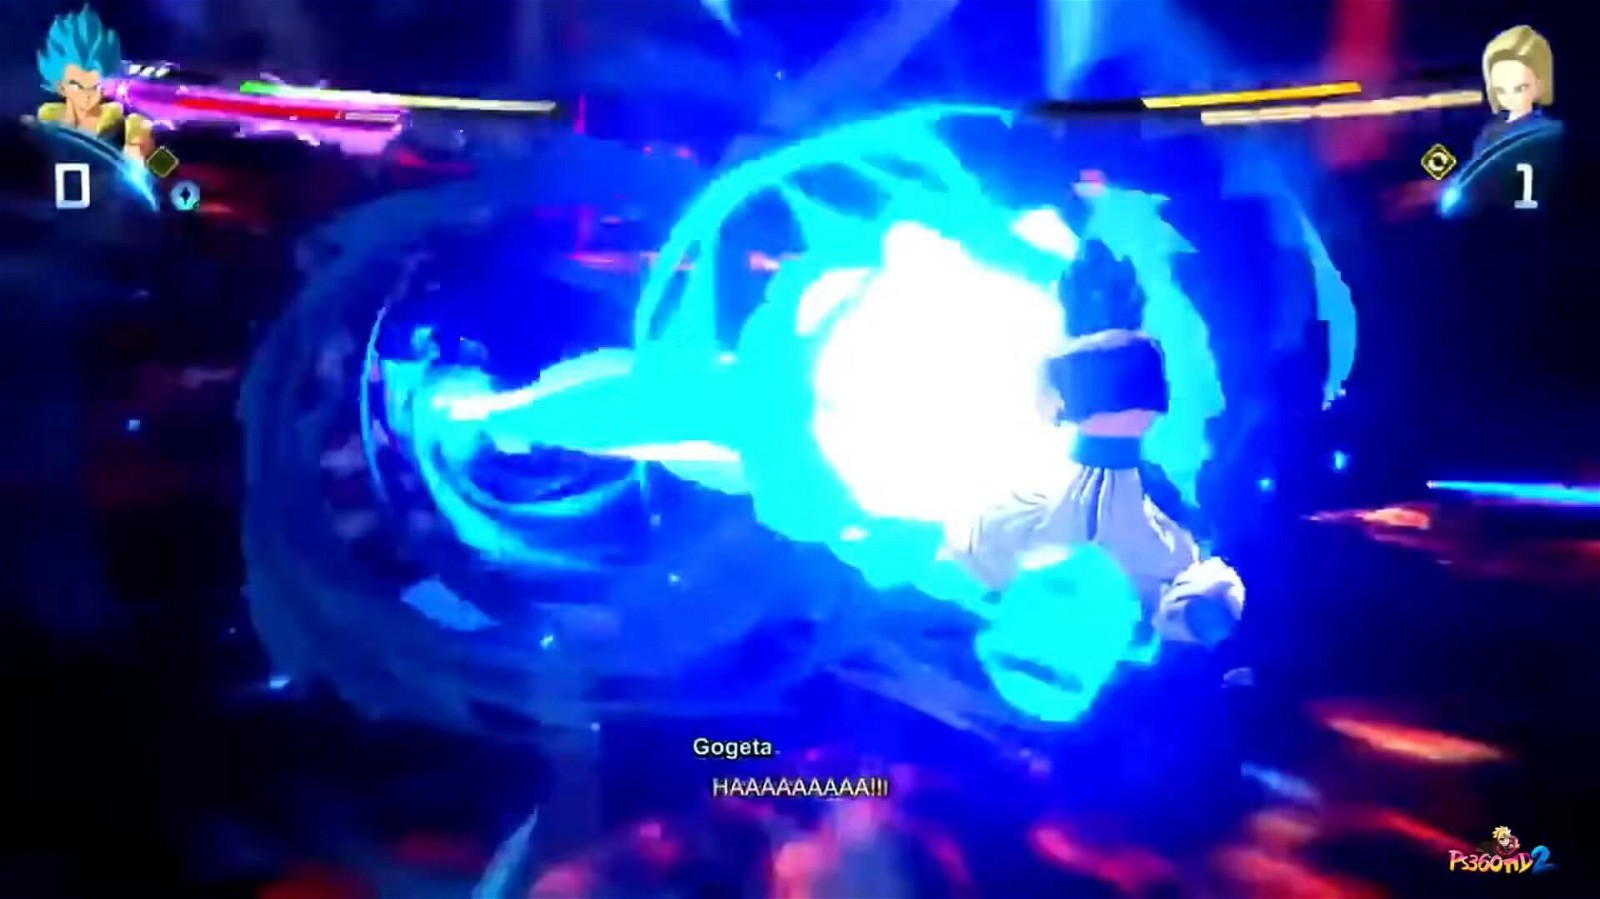 Gogeta using a Kamehameha wave on Android 18. Credits: PS360HD2 on YouTube